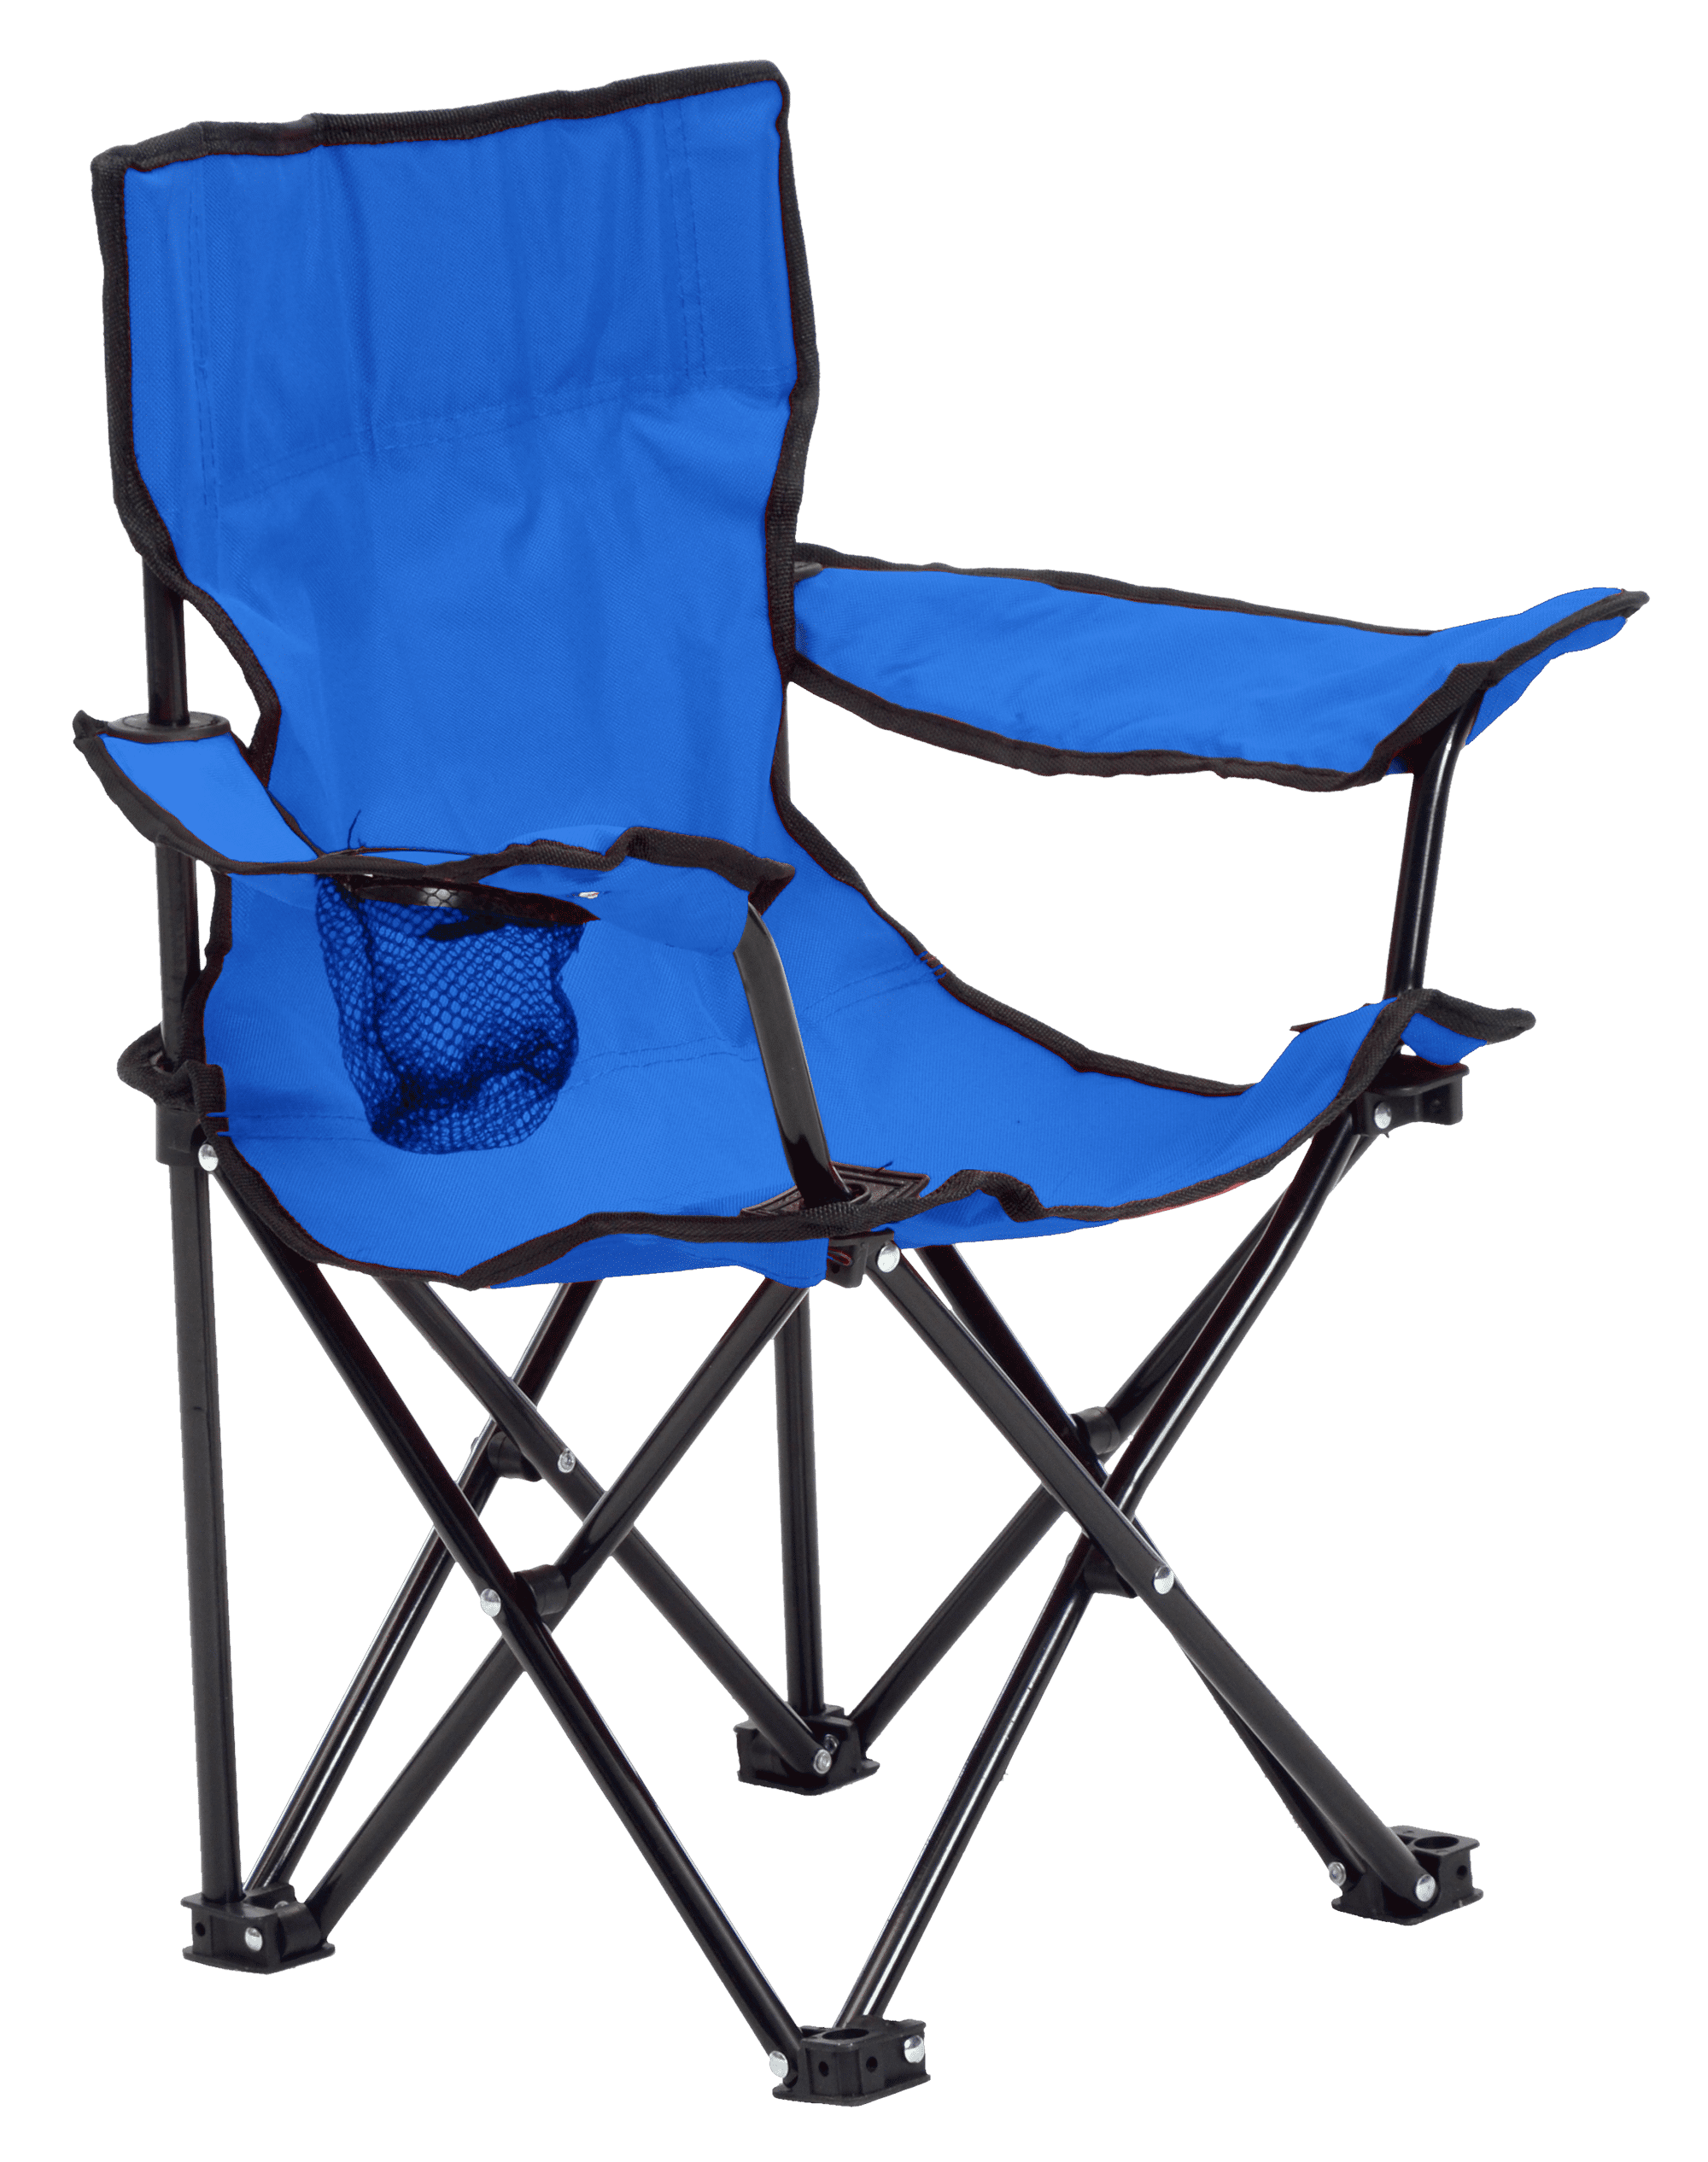 Folding Chairs Walmart : National Public Seating Commercialine Padded